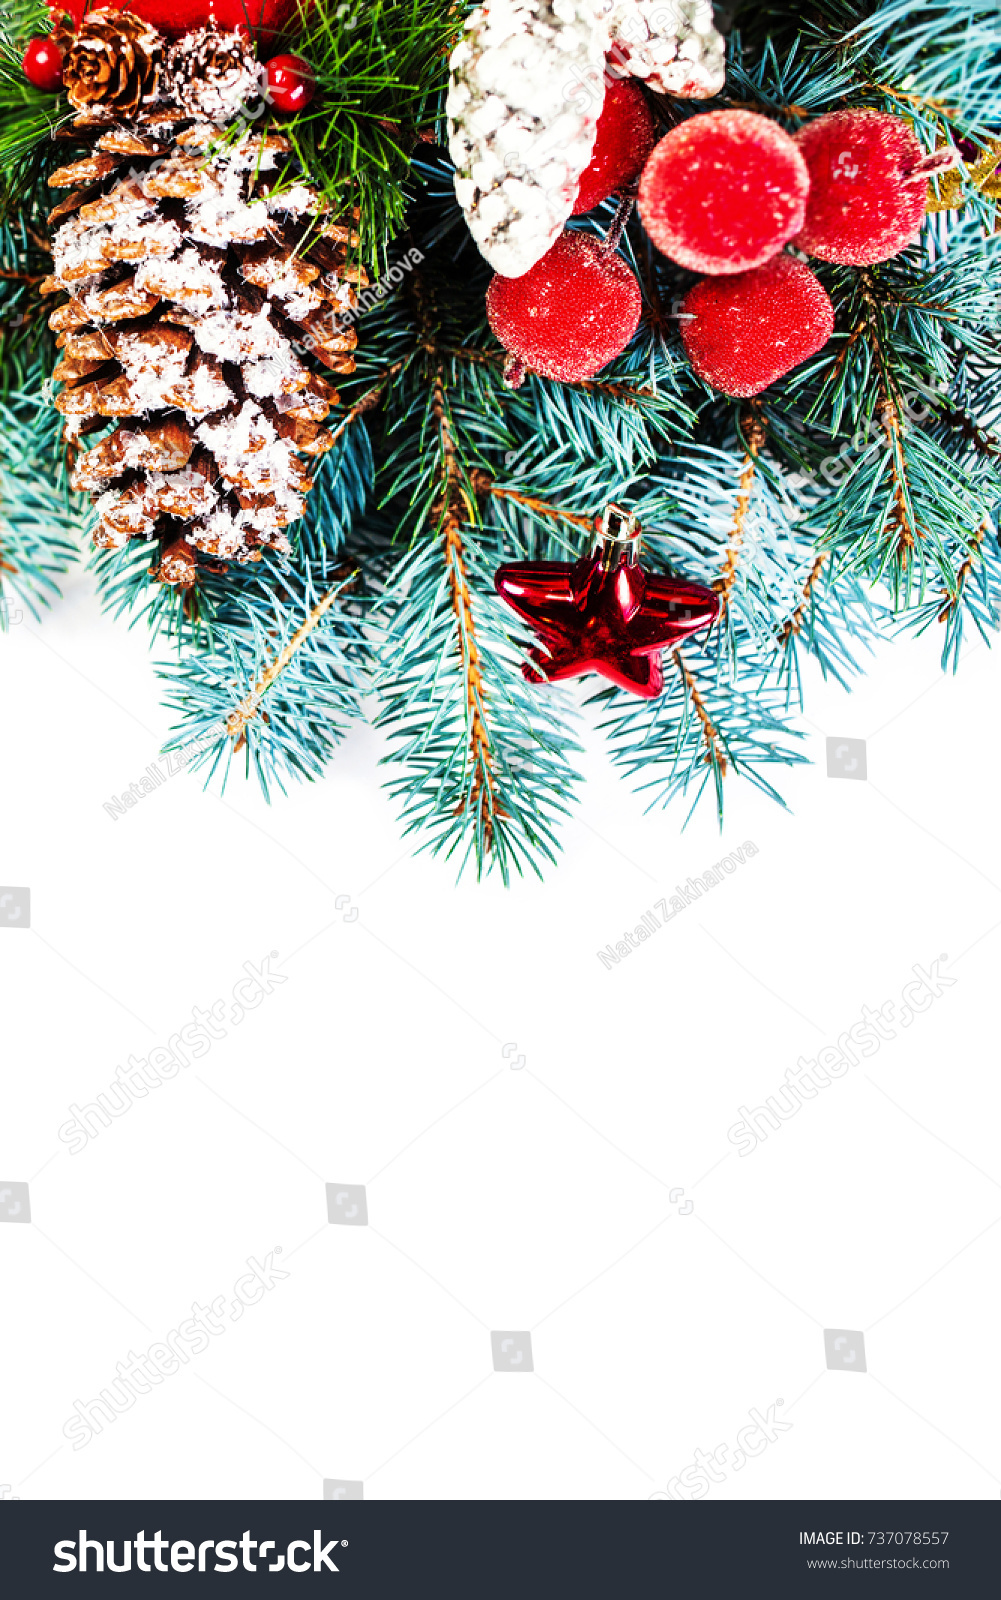 Vintage Christmas Tree Pine Branches and Christmas decorations isolated on white background with copy space. Merry christmas.
 #737078557